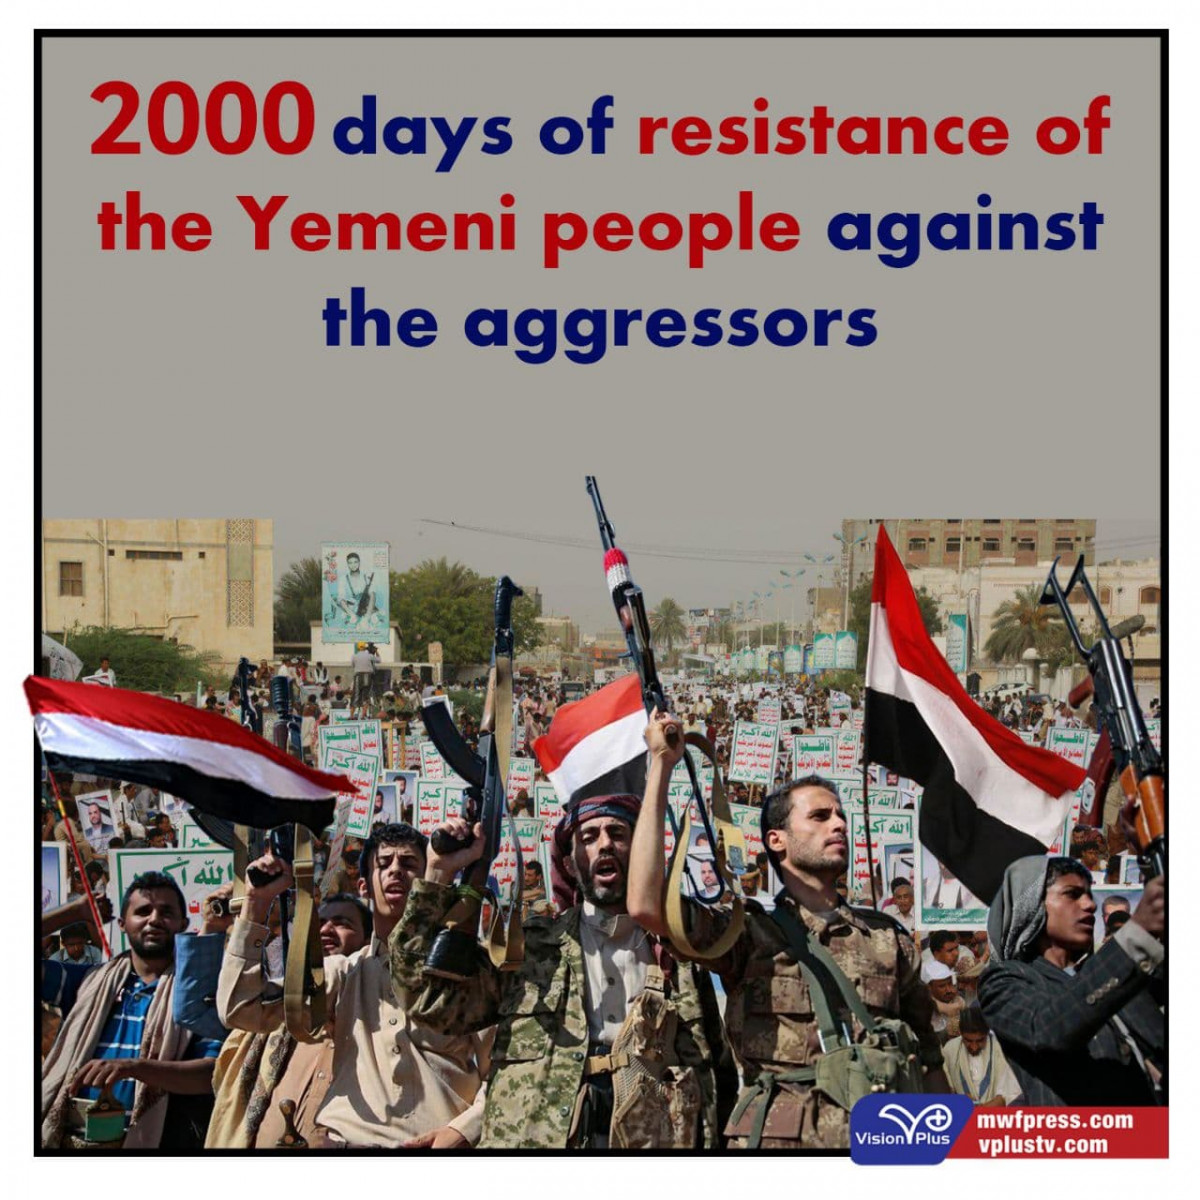 2000 days of resistance of the Yemeni people against the aggressors